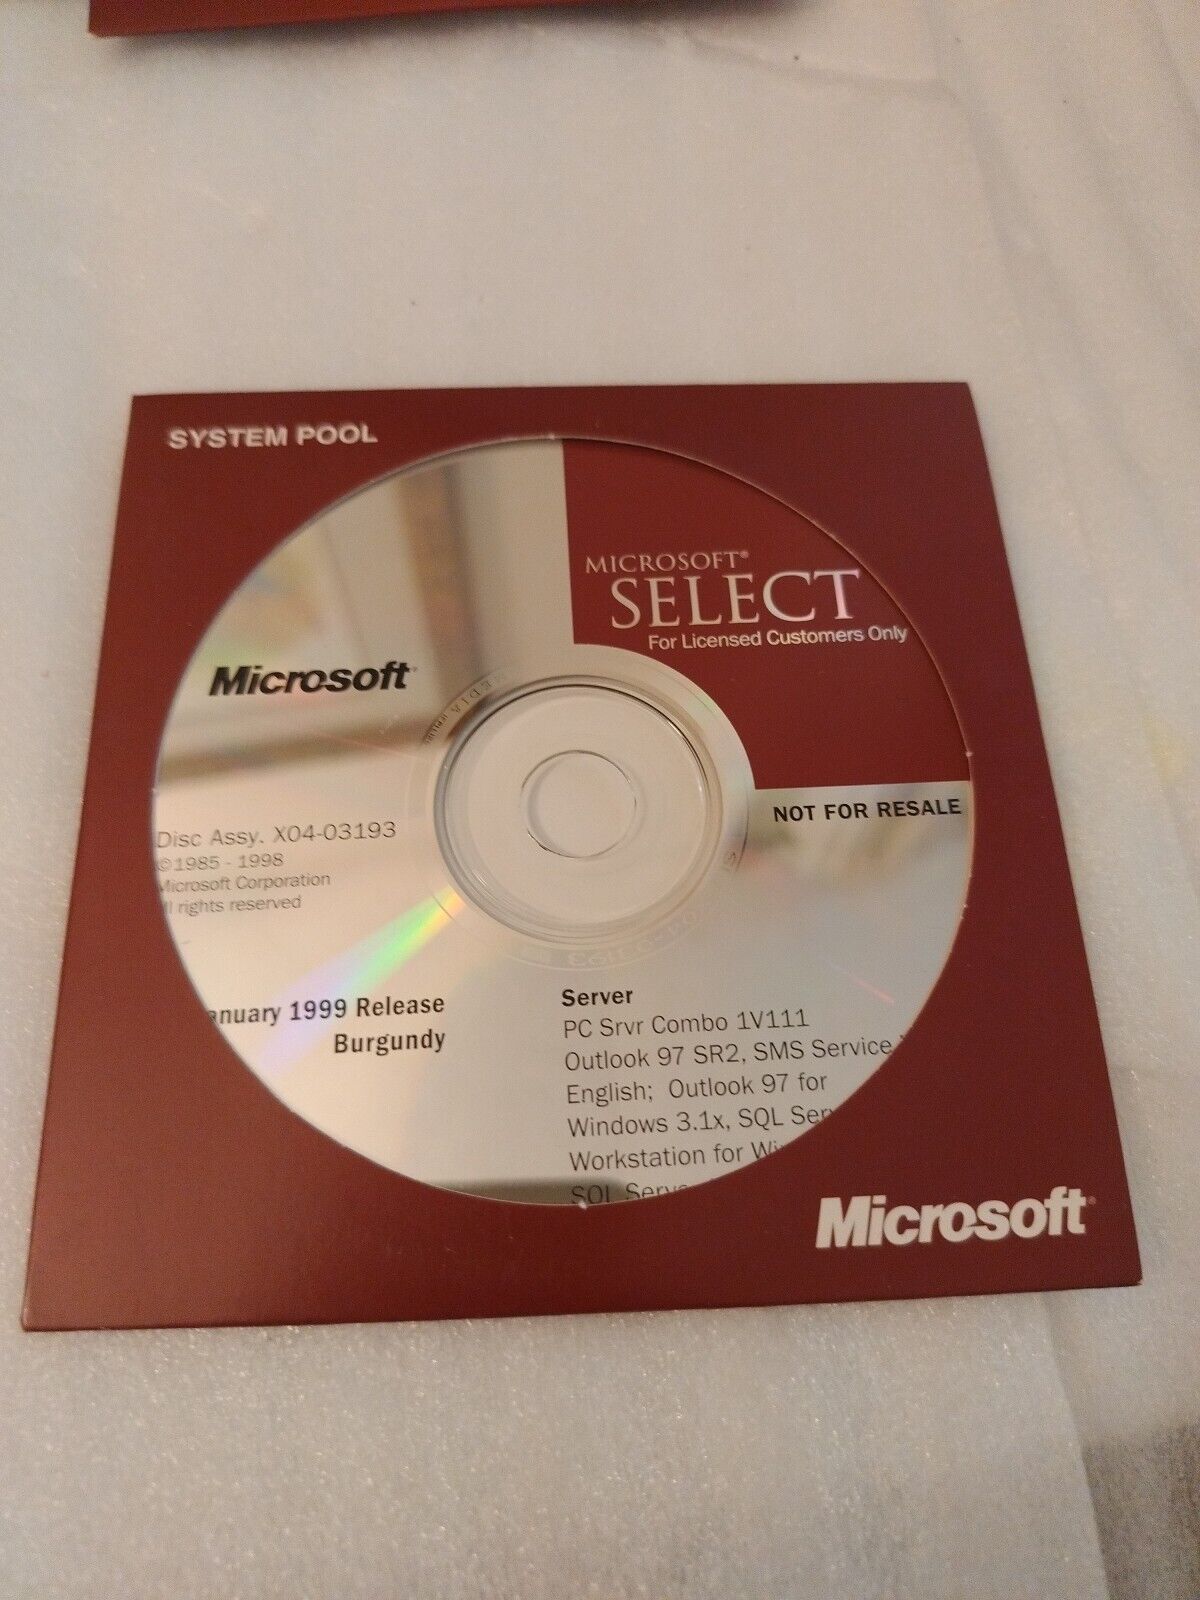 Microsoft Select System pool (Burgundy) January 1999 Release